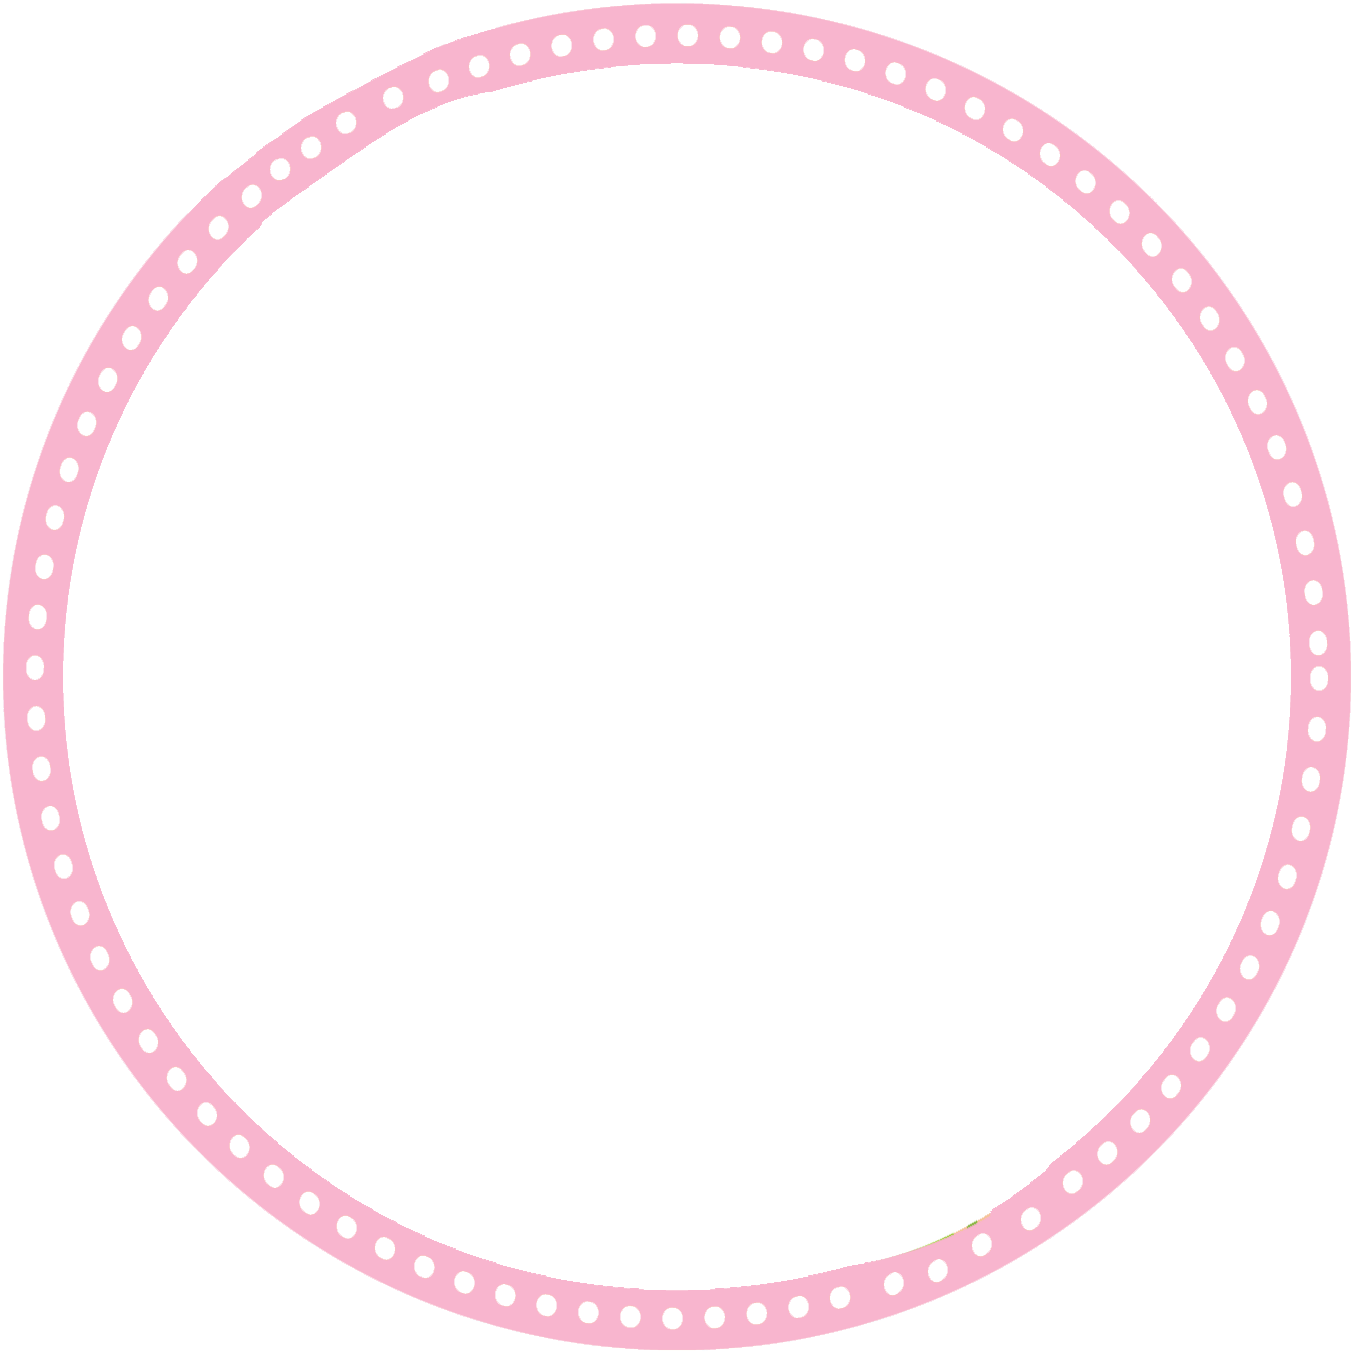 A Pink Circle With White Dots